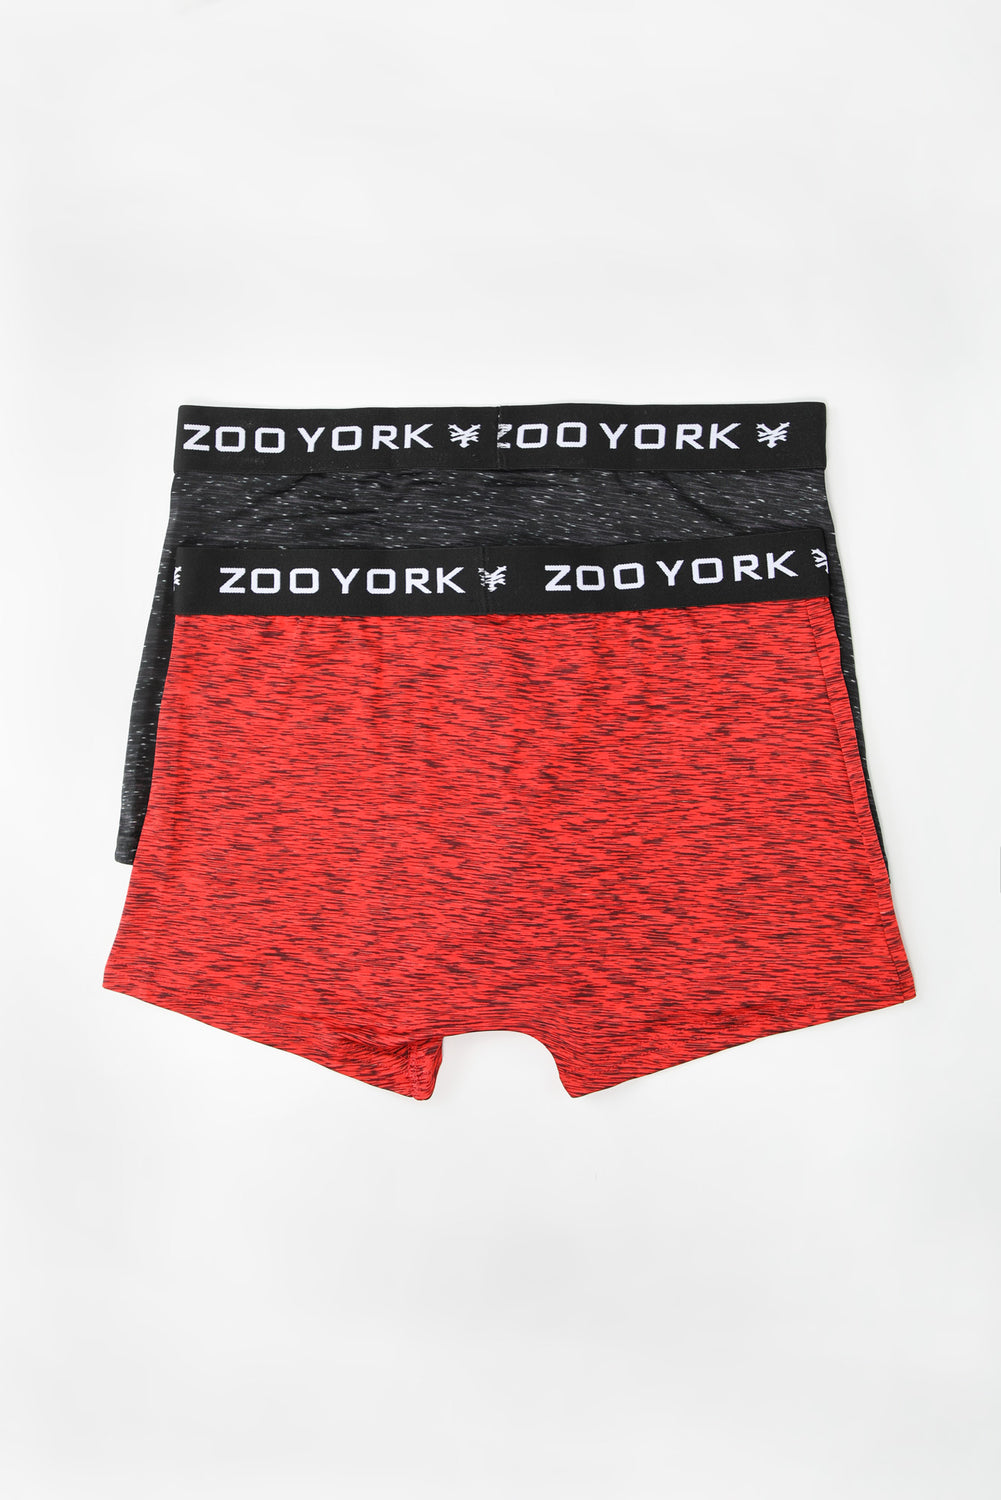 Zoo York Mens 2-Pack Space Dye Boxer Briefs Red